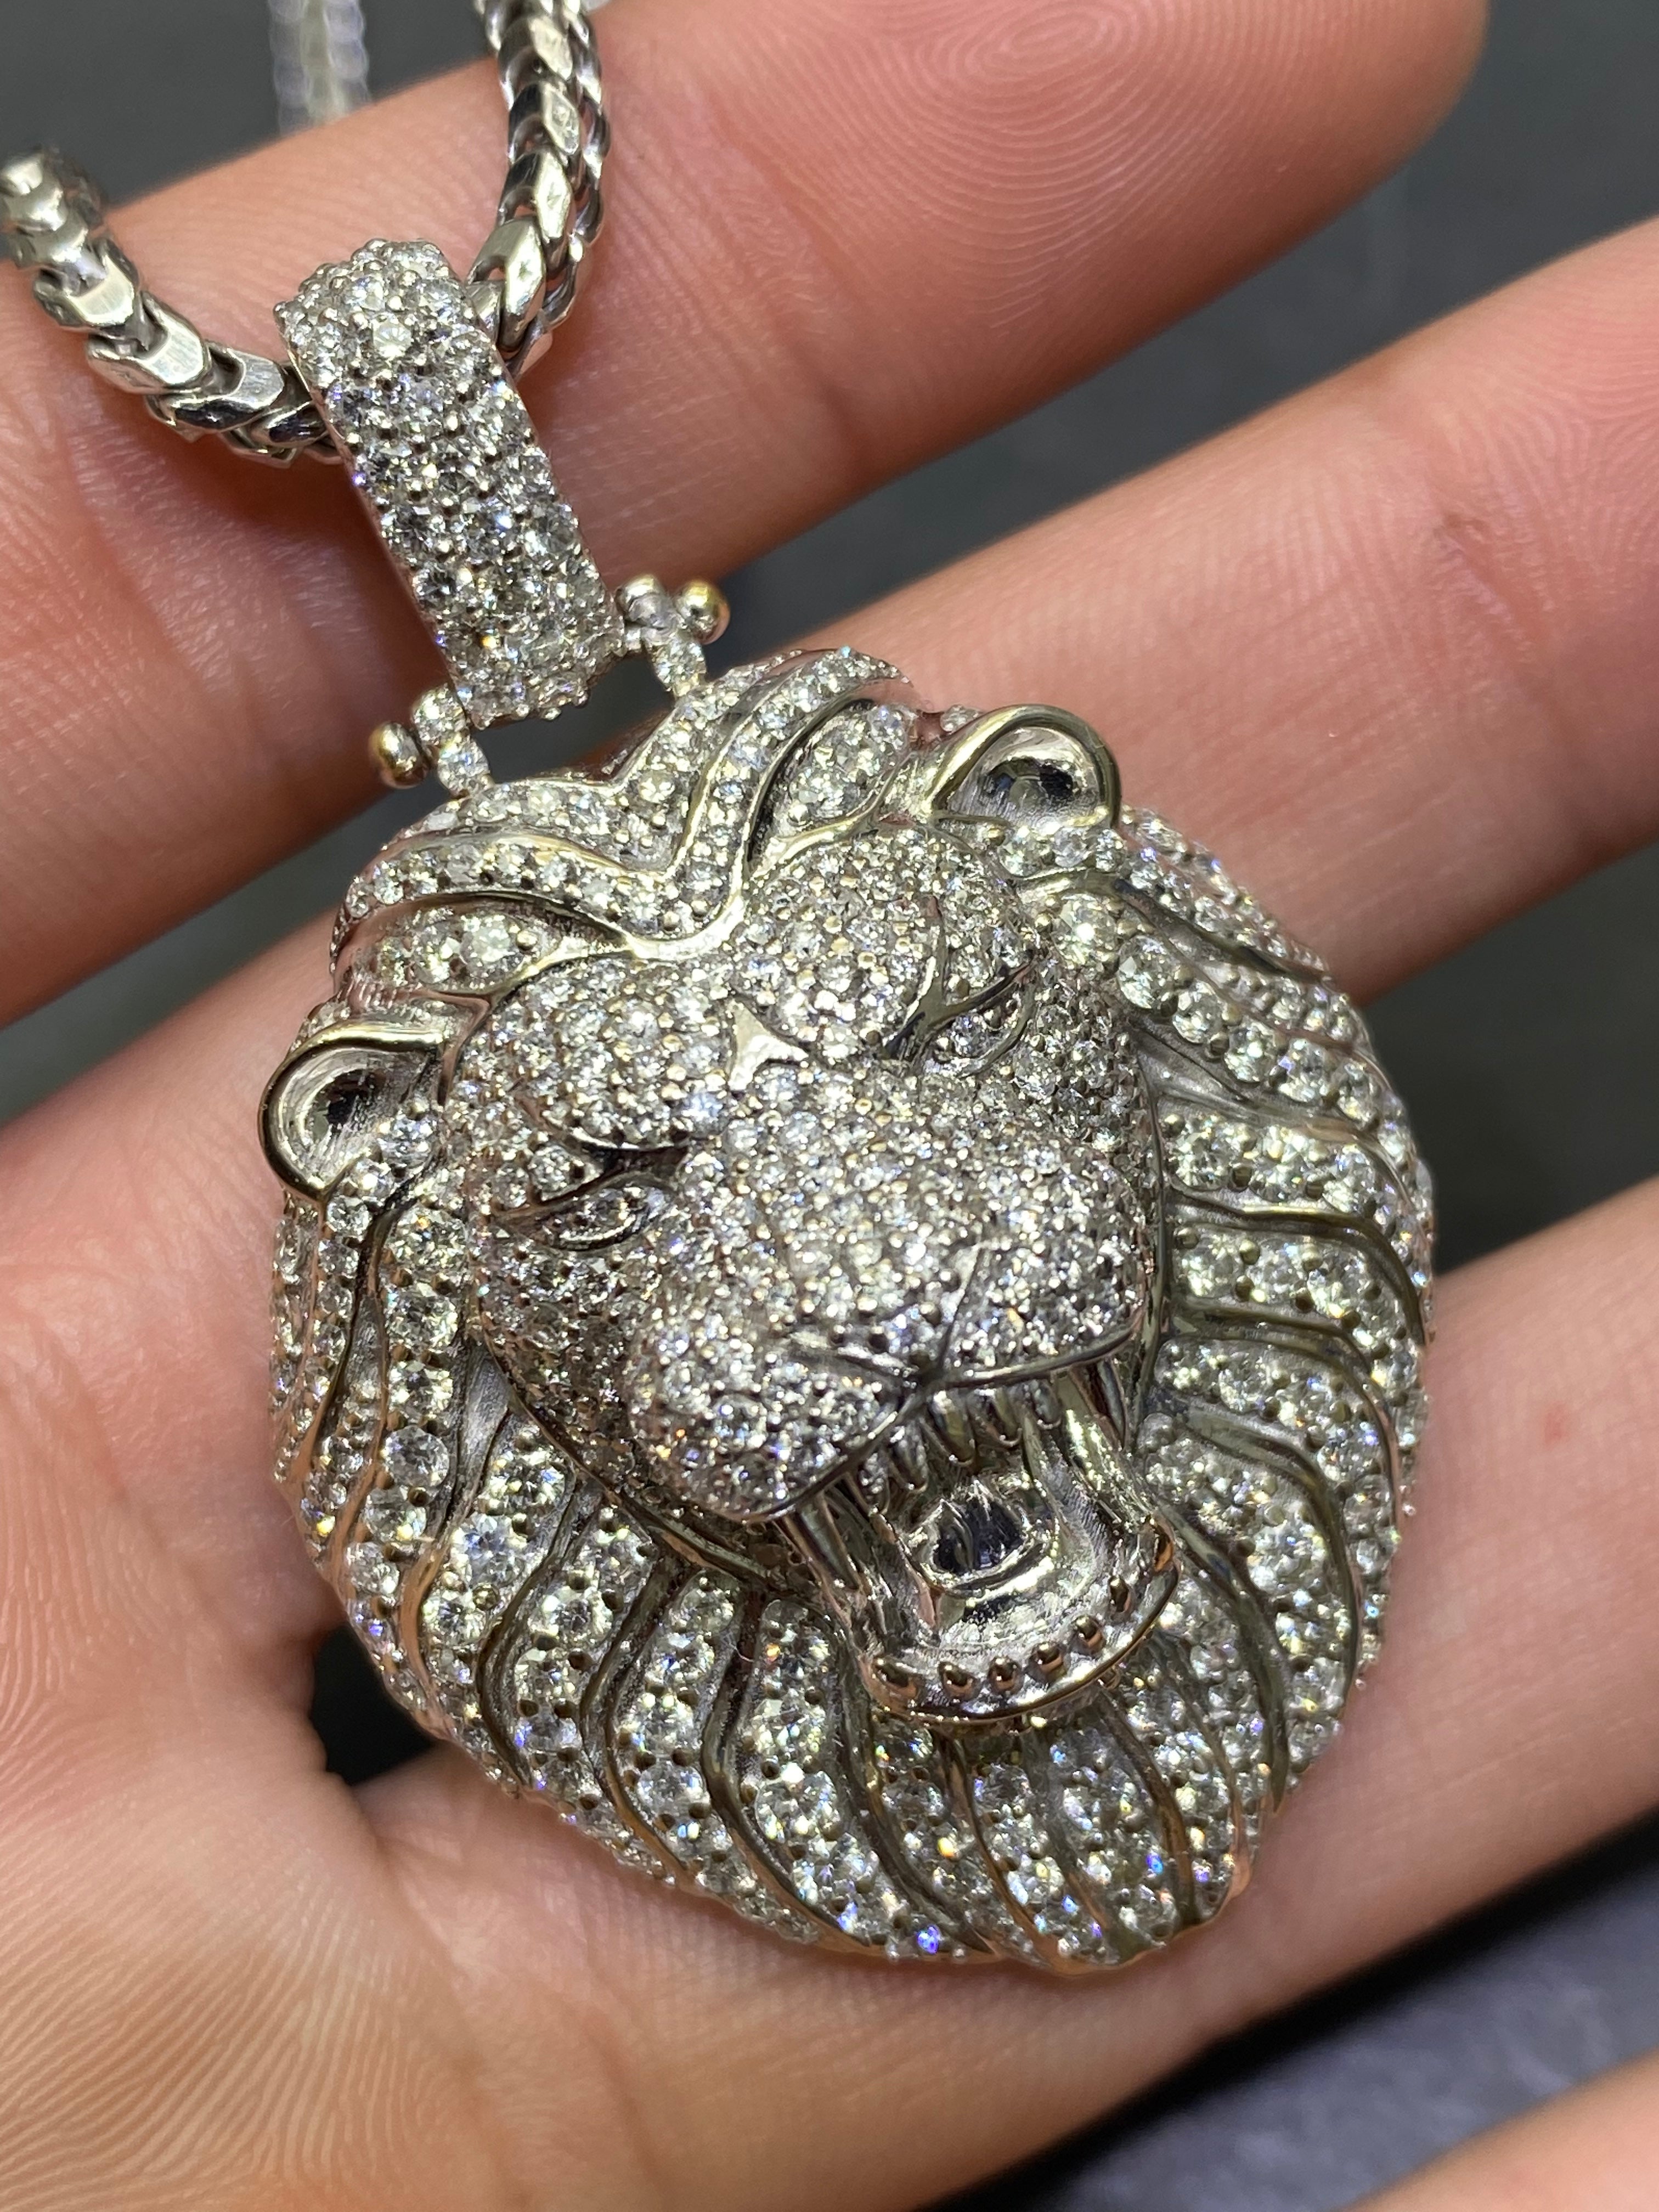 New 14k "Iced Out" Lion Custom Pendant 4 cts t.w. Natural VS1 Diamonds and 32 grams 14k White Gold